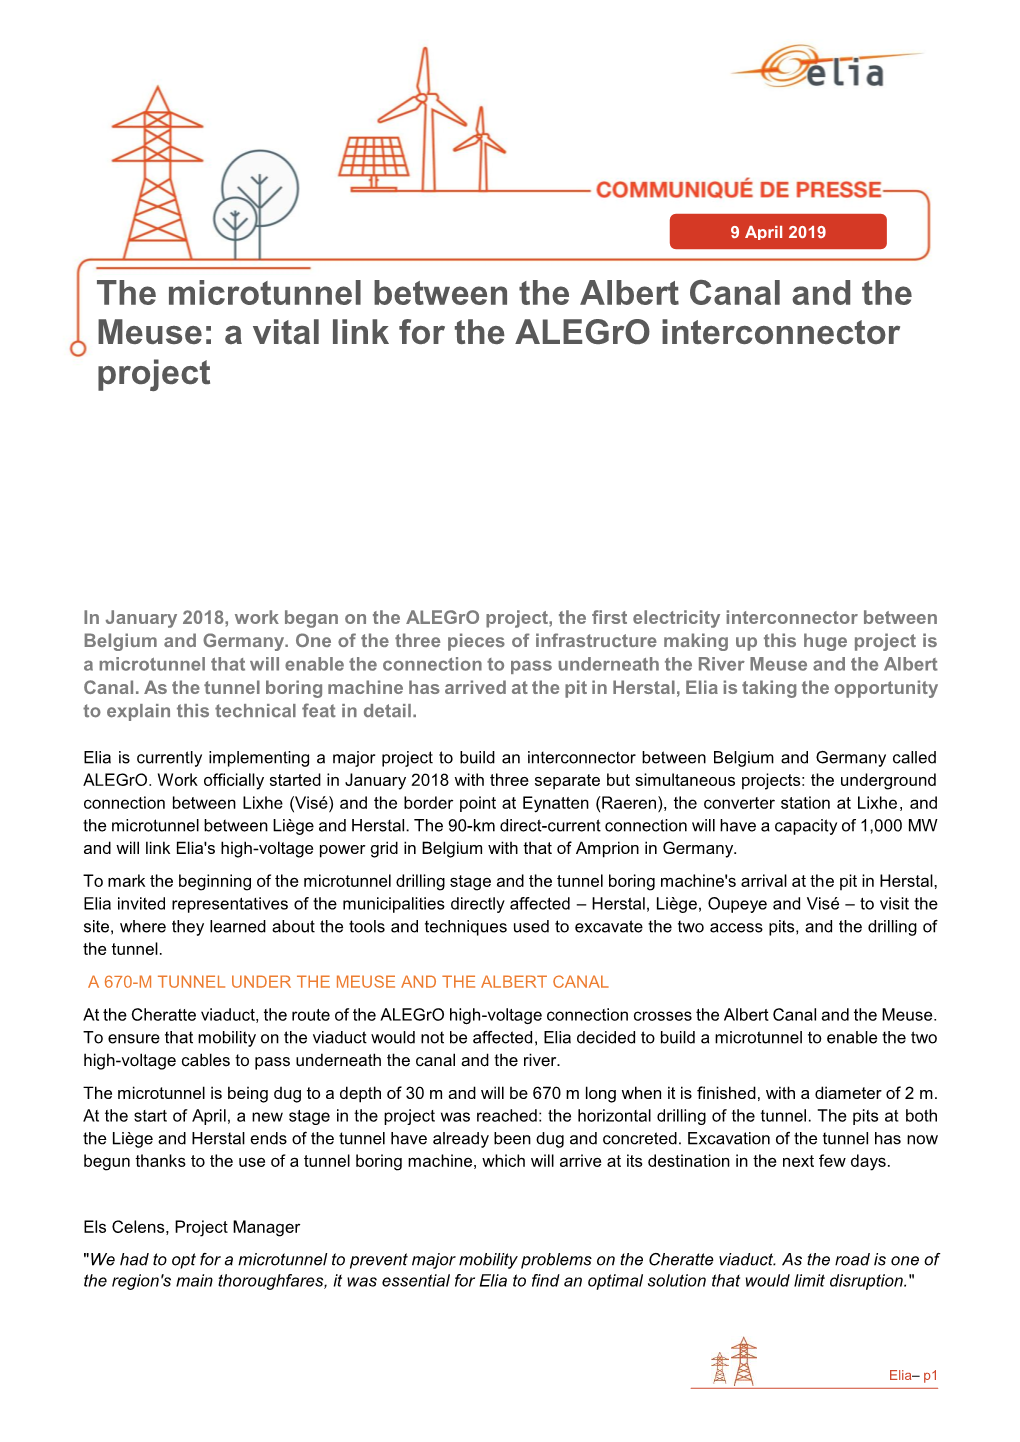 A Vital Link for the Alegro Interconnector Project